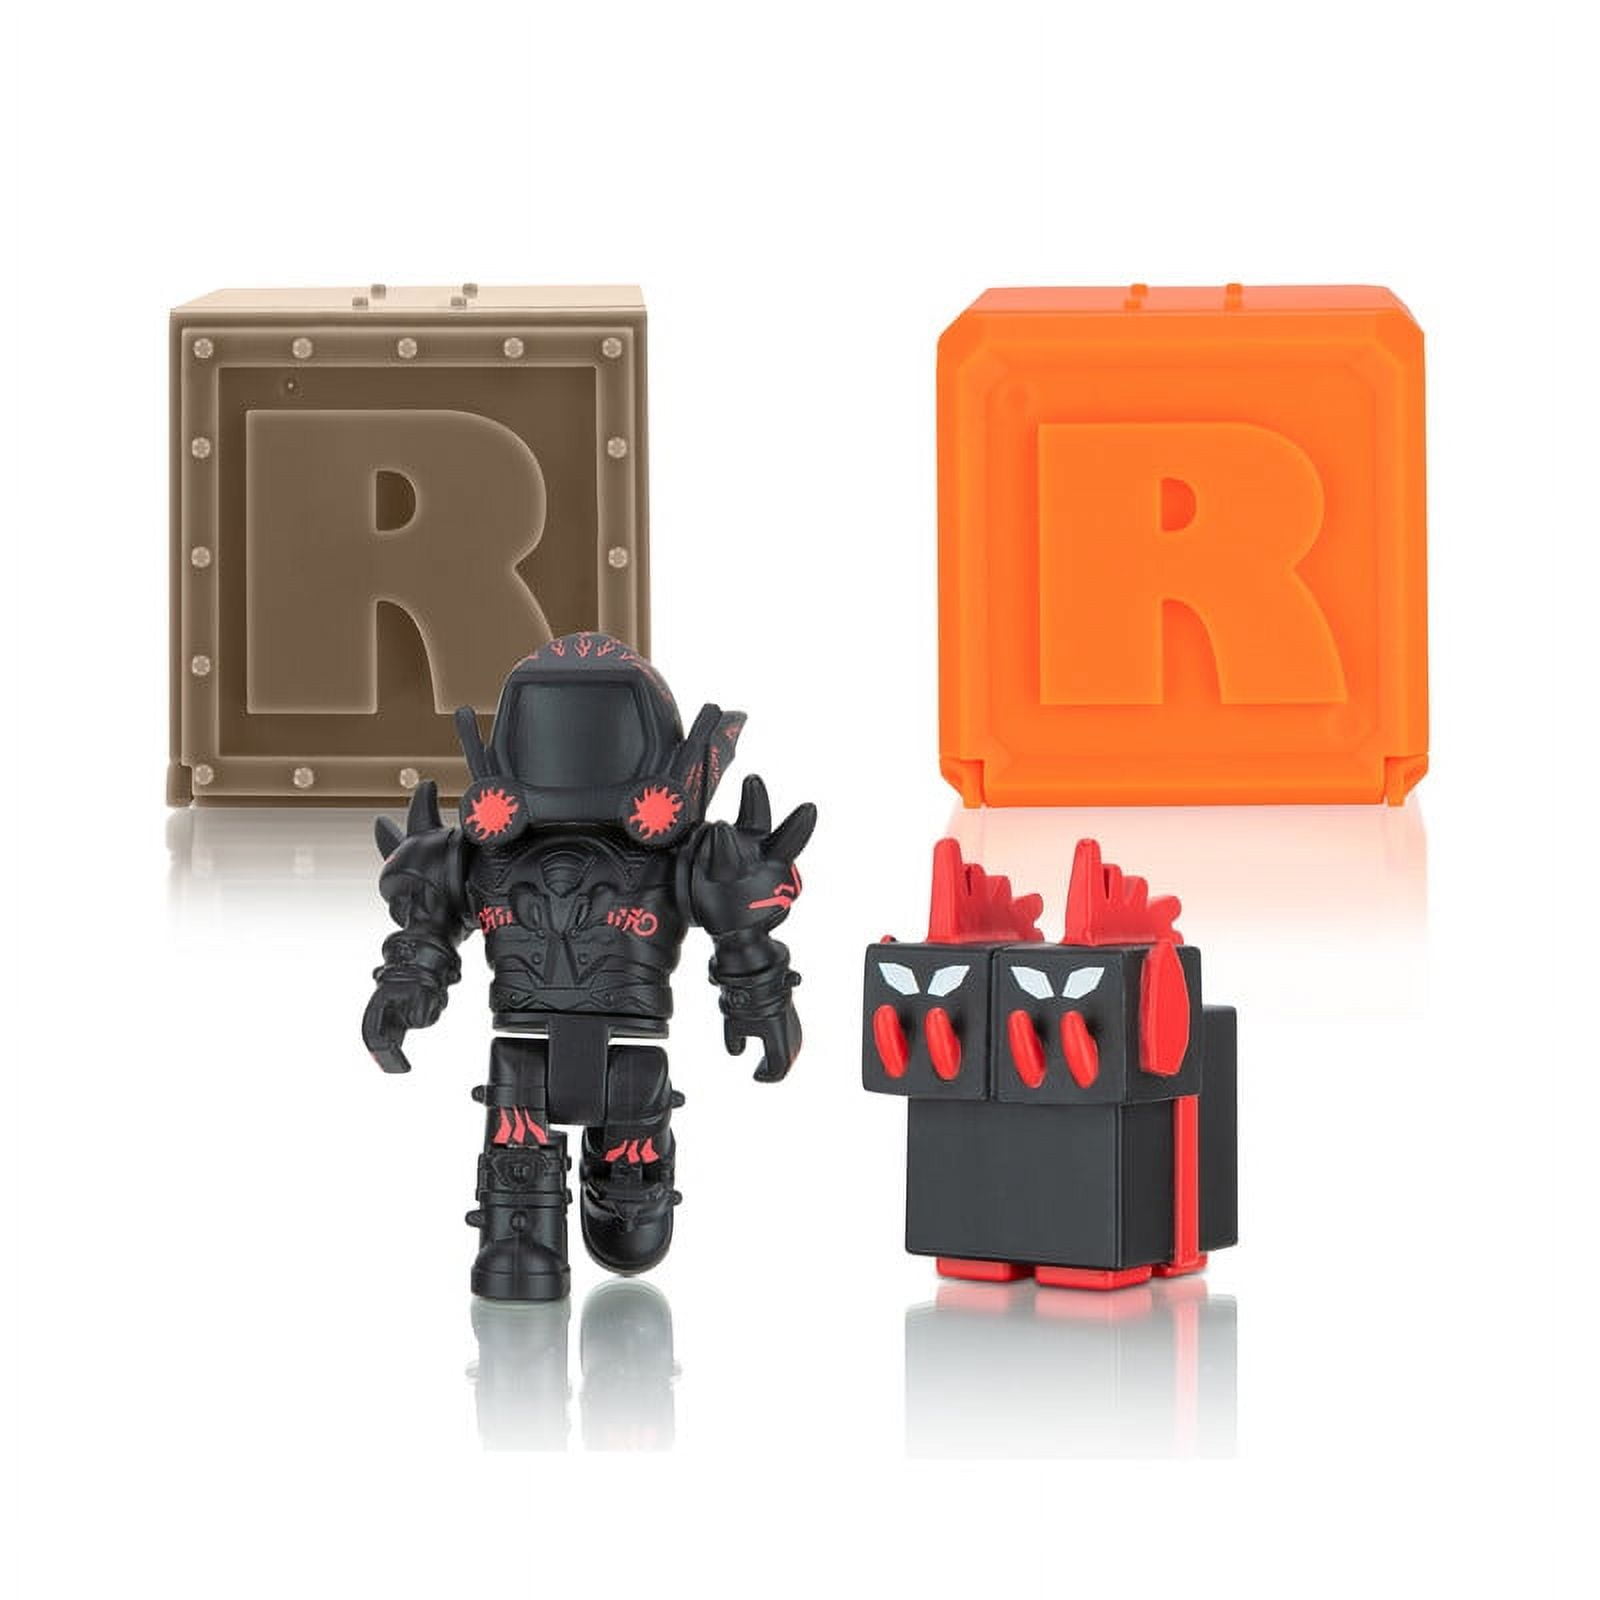 FREE DOMINUS! GET THEM AS FREE ITEMS ON ROBLOX 